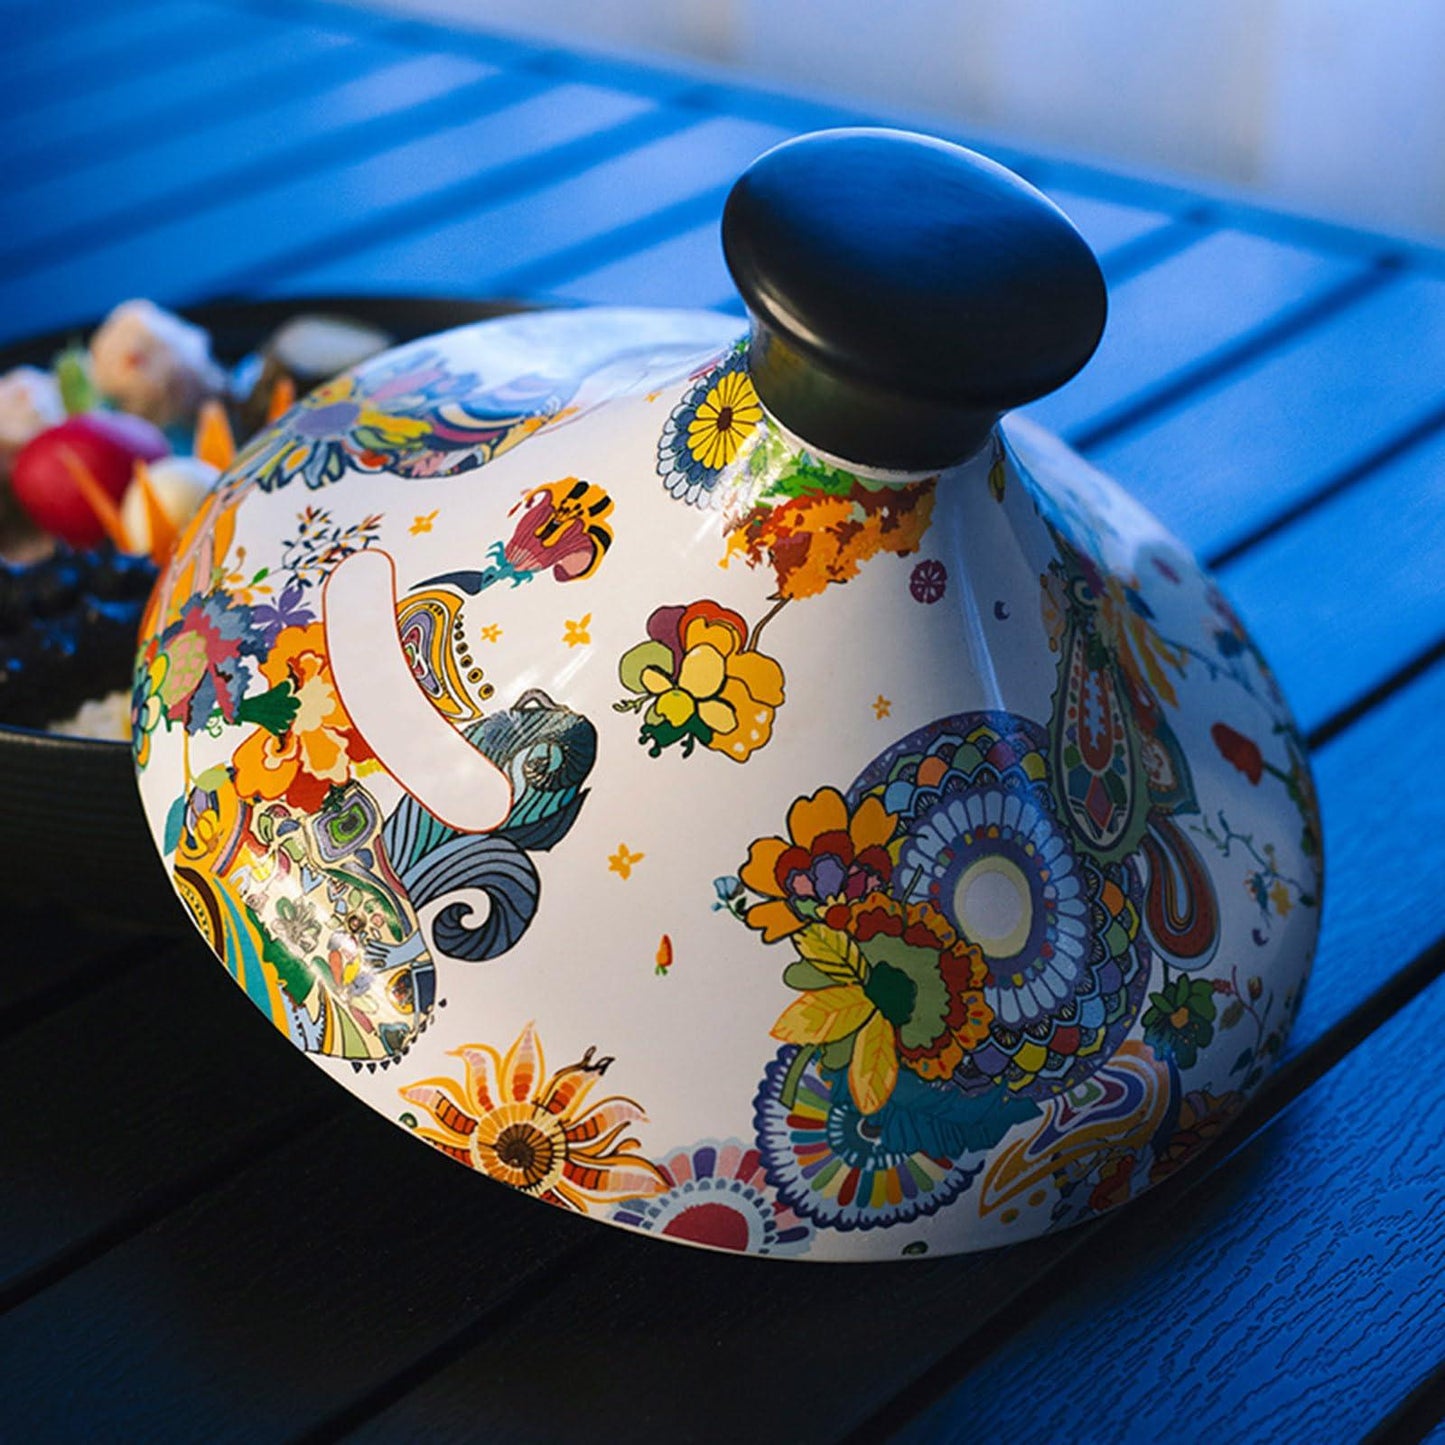 Moroccan Tagine Pot Ceramic Tagine Pot Moroccan for Cooking with Ceramic Cone-Shaped Closed Lid Ceramic Cooker Pot for Cooking and Stew Casserole Slow Cooker - CookCave